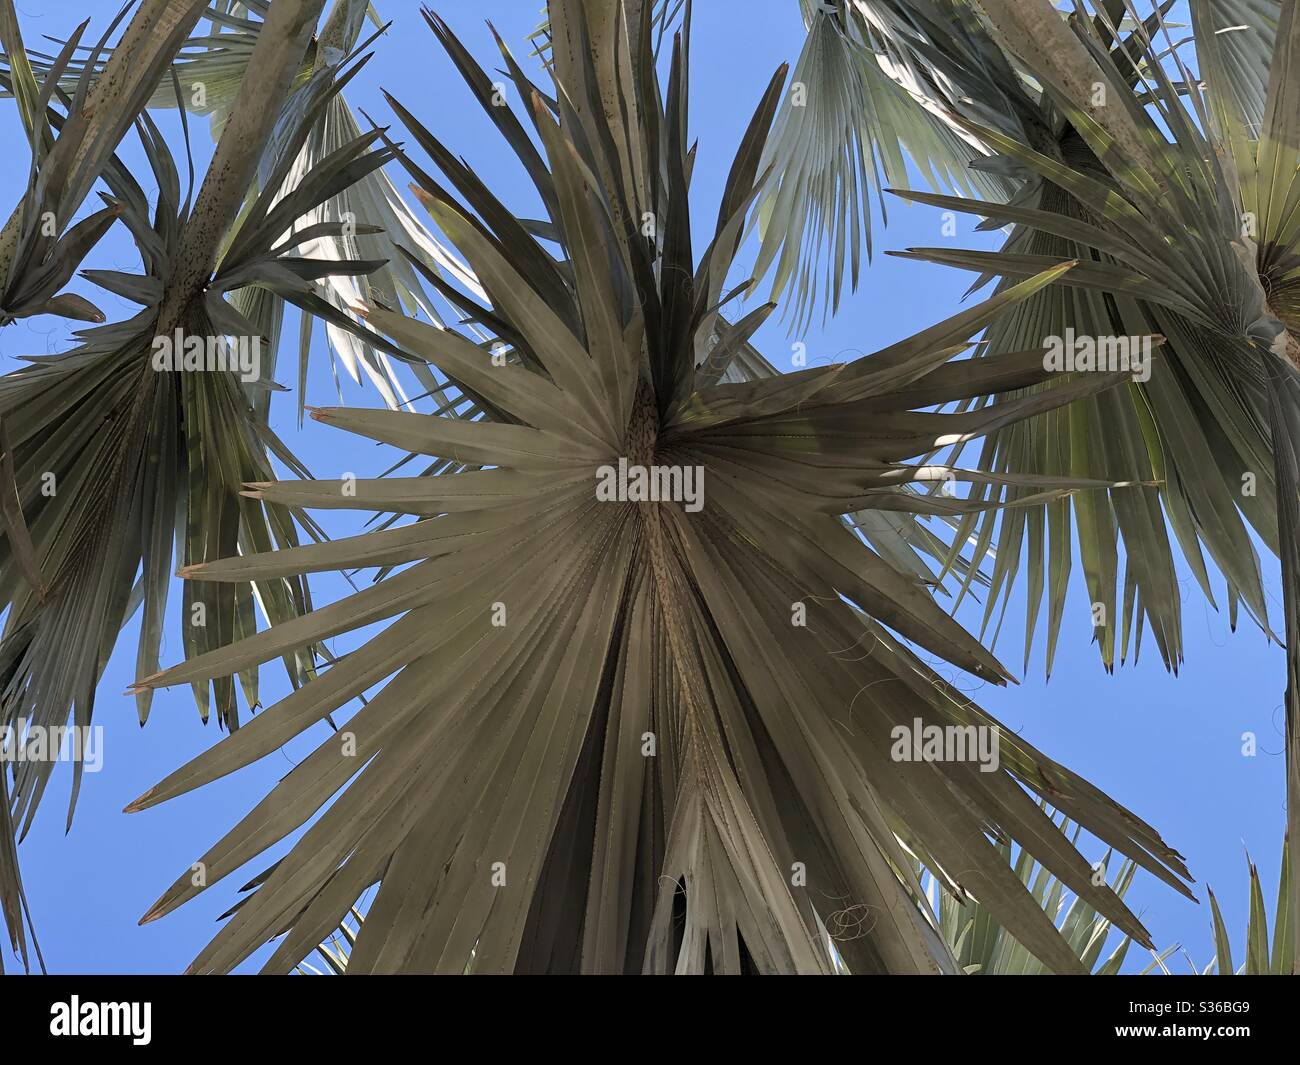 Palm fronds against blue sky Stock Photo